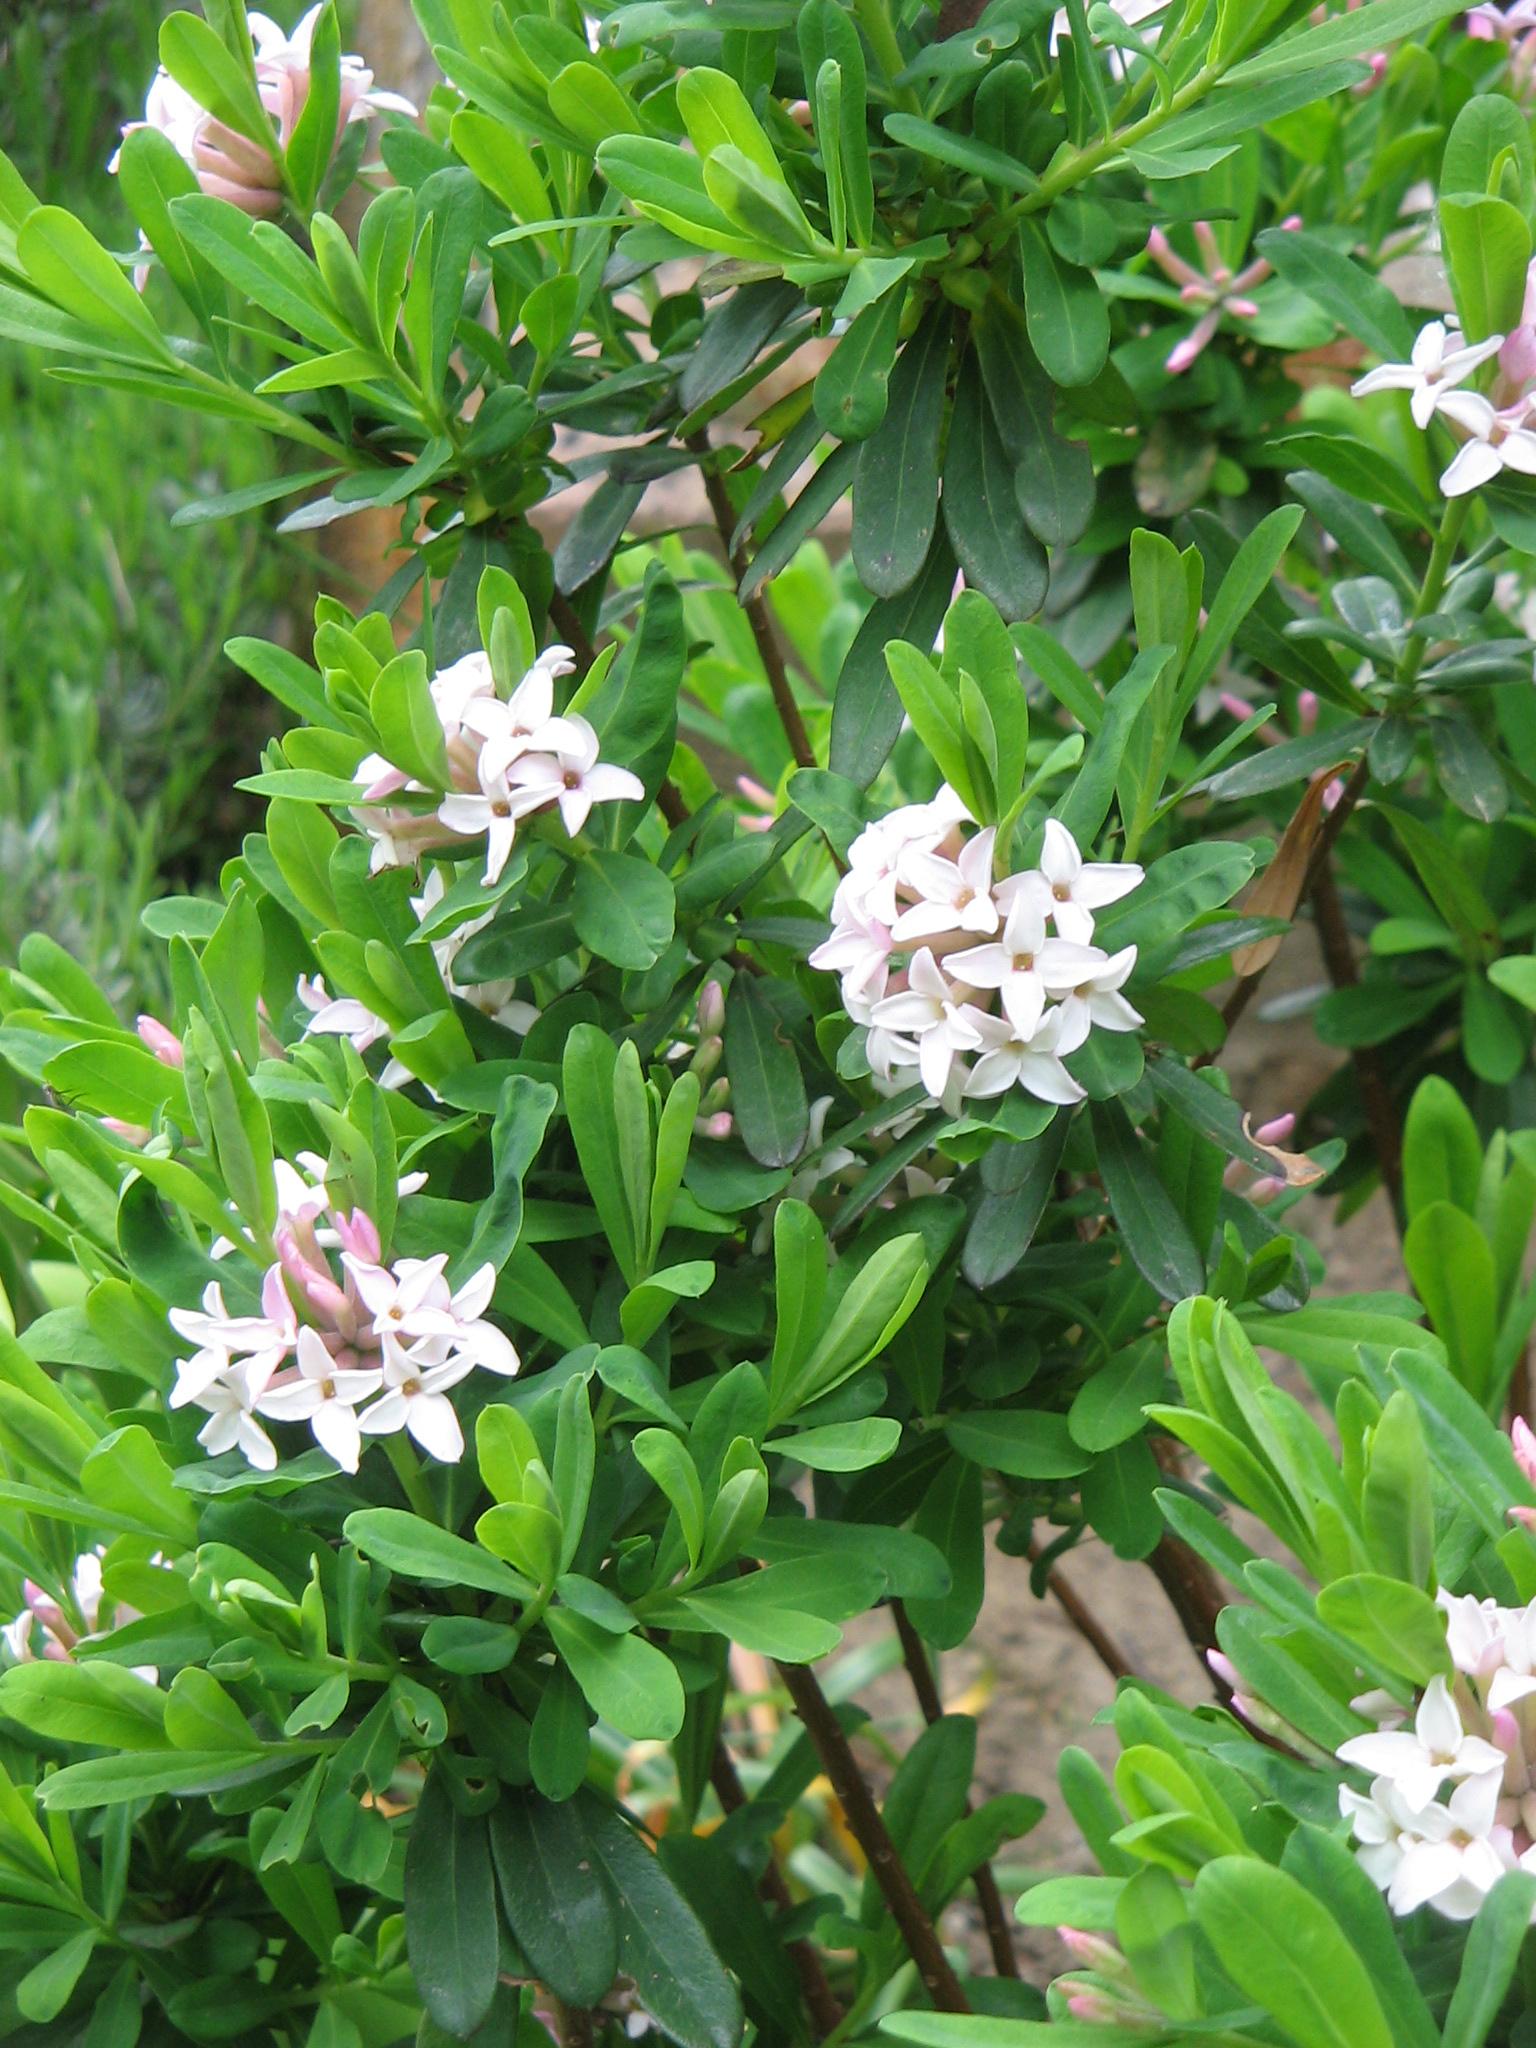 white flowers with light-brown center, lime-green leaves and brown-green stems